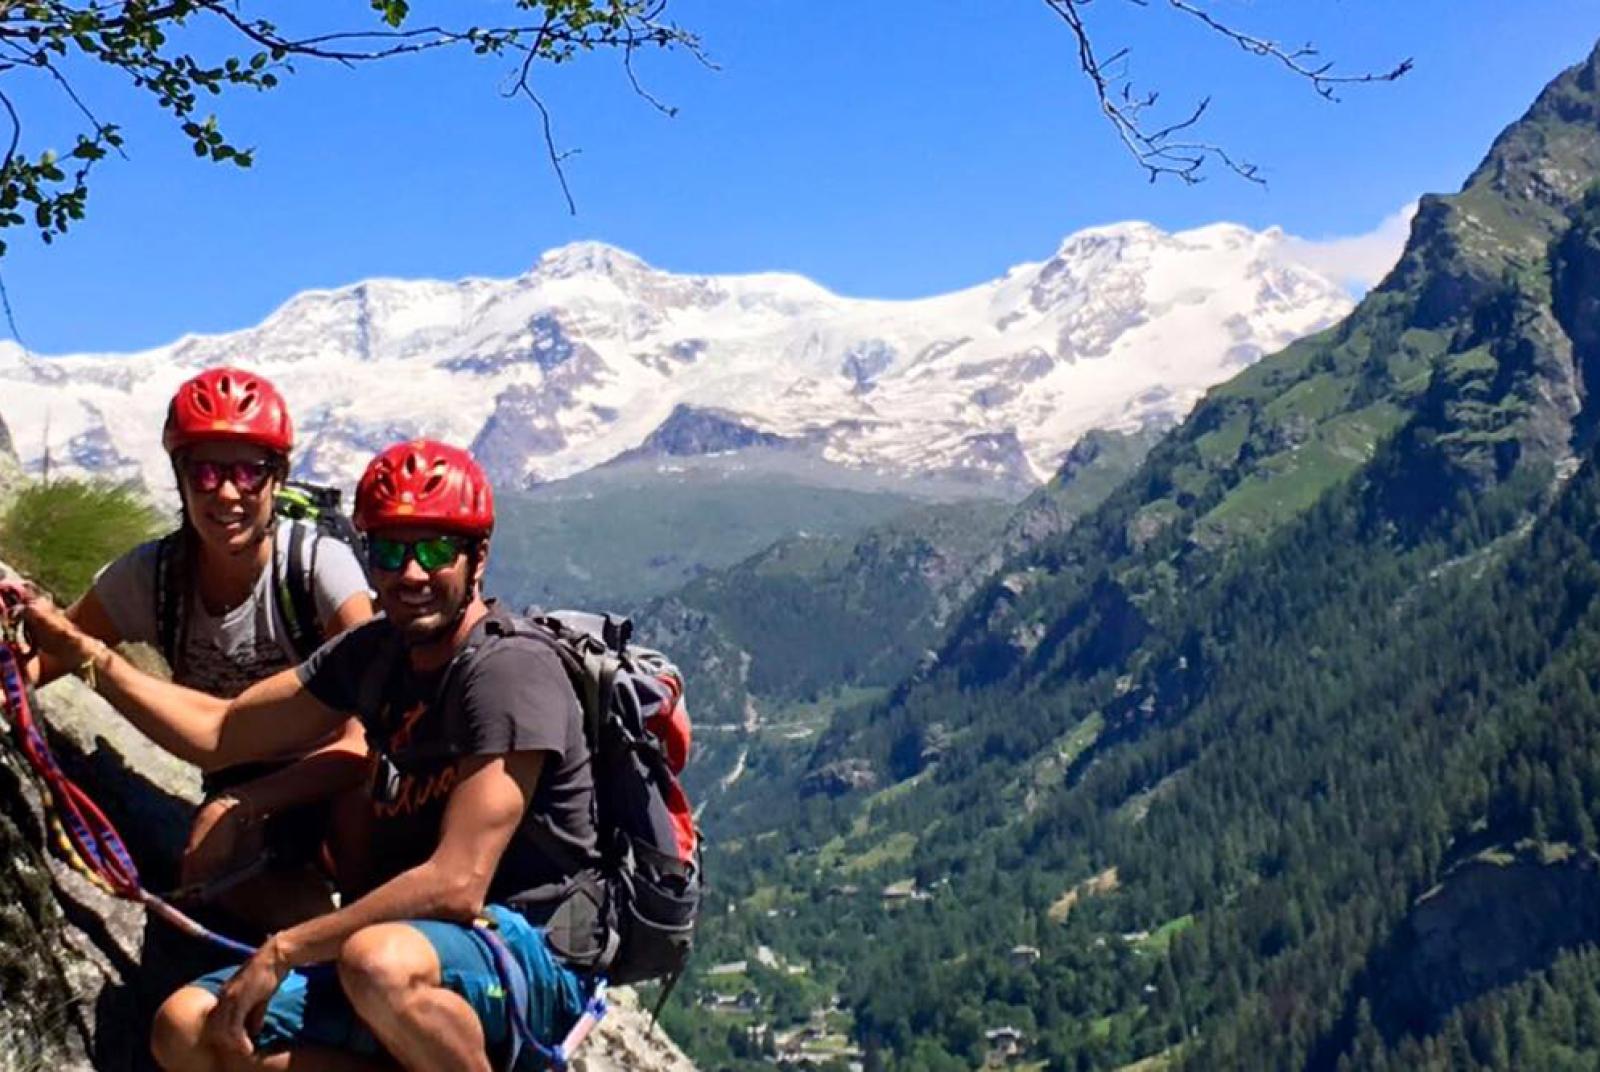 DISCOVER THE FERRATA OF GRESSONEY WITH THE ALPINE GUIDES